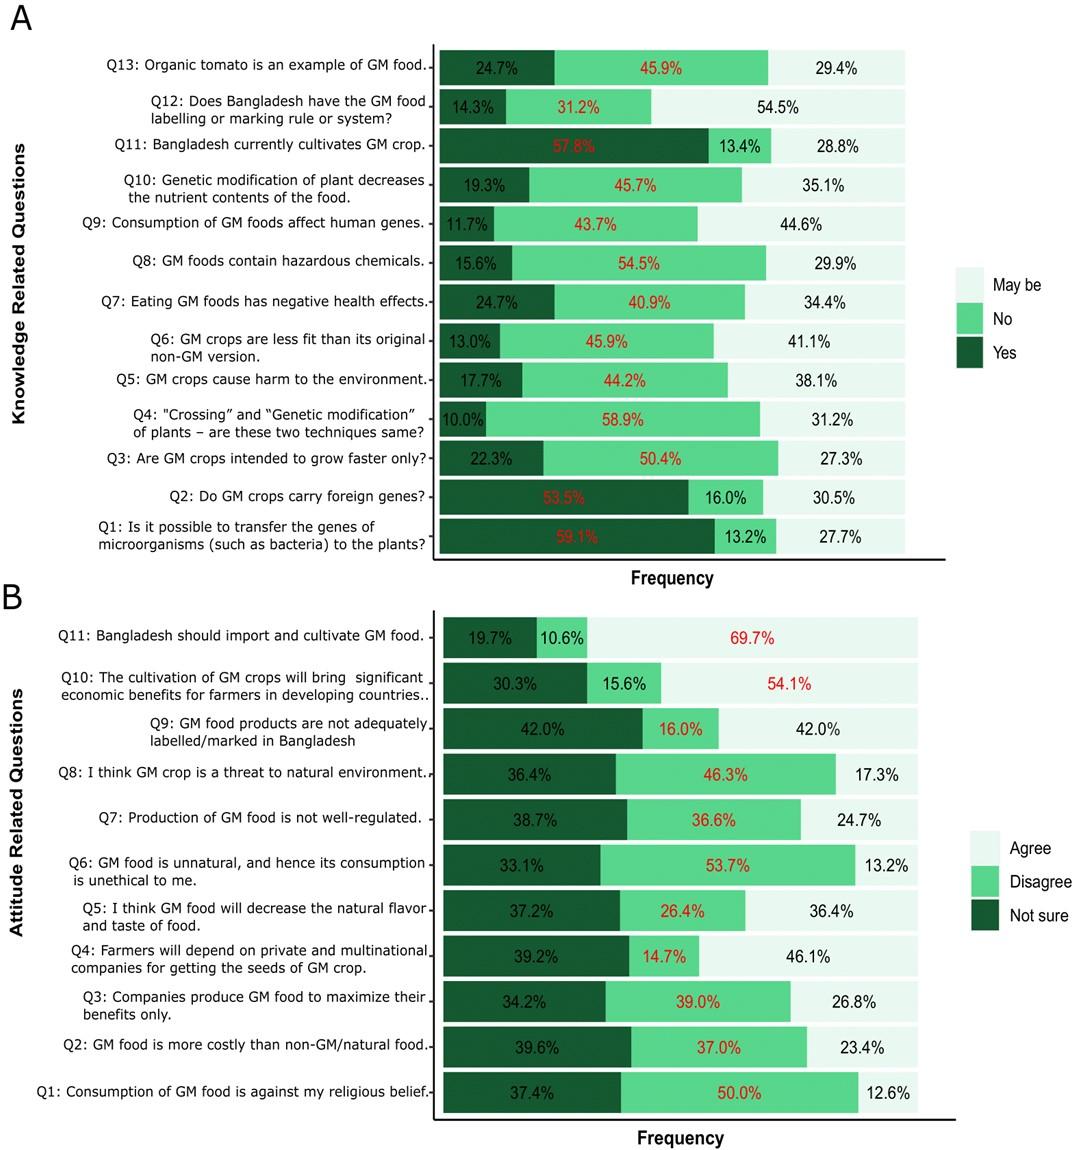 Knowledge and attitude towards genetically modified foods: A quantitative cross-sectional study among the educated subjects in the four largest divisions of Bangladesh